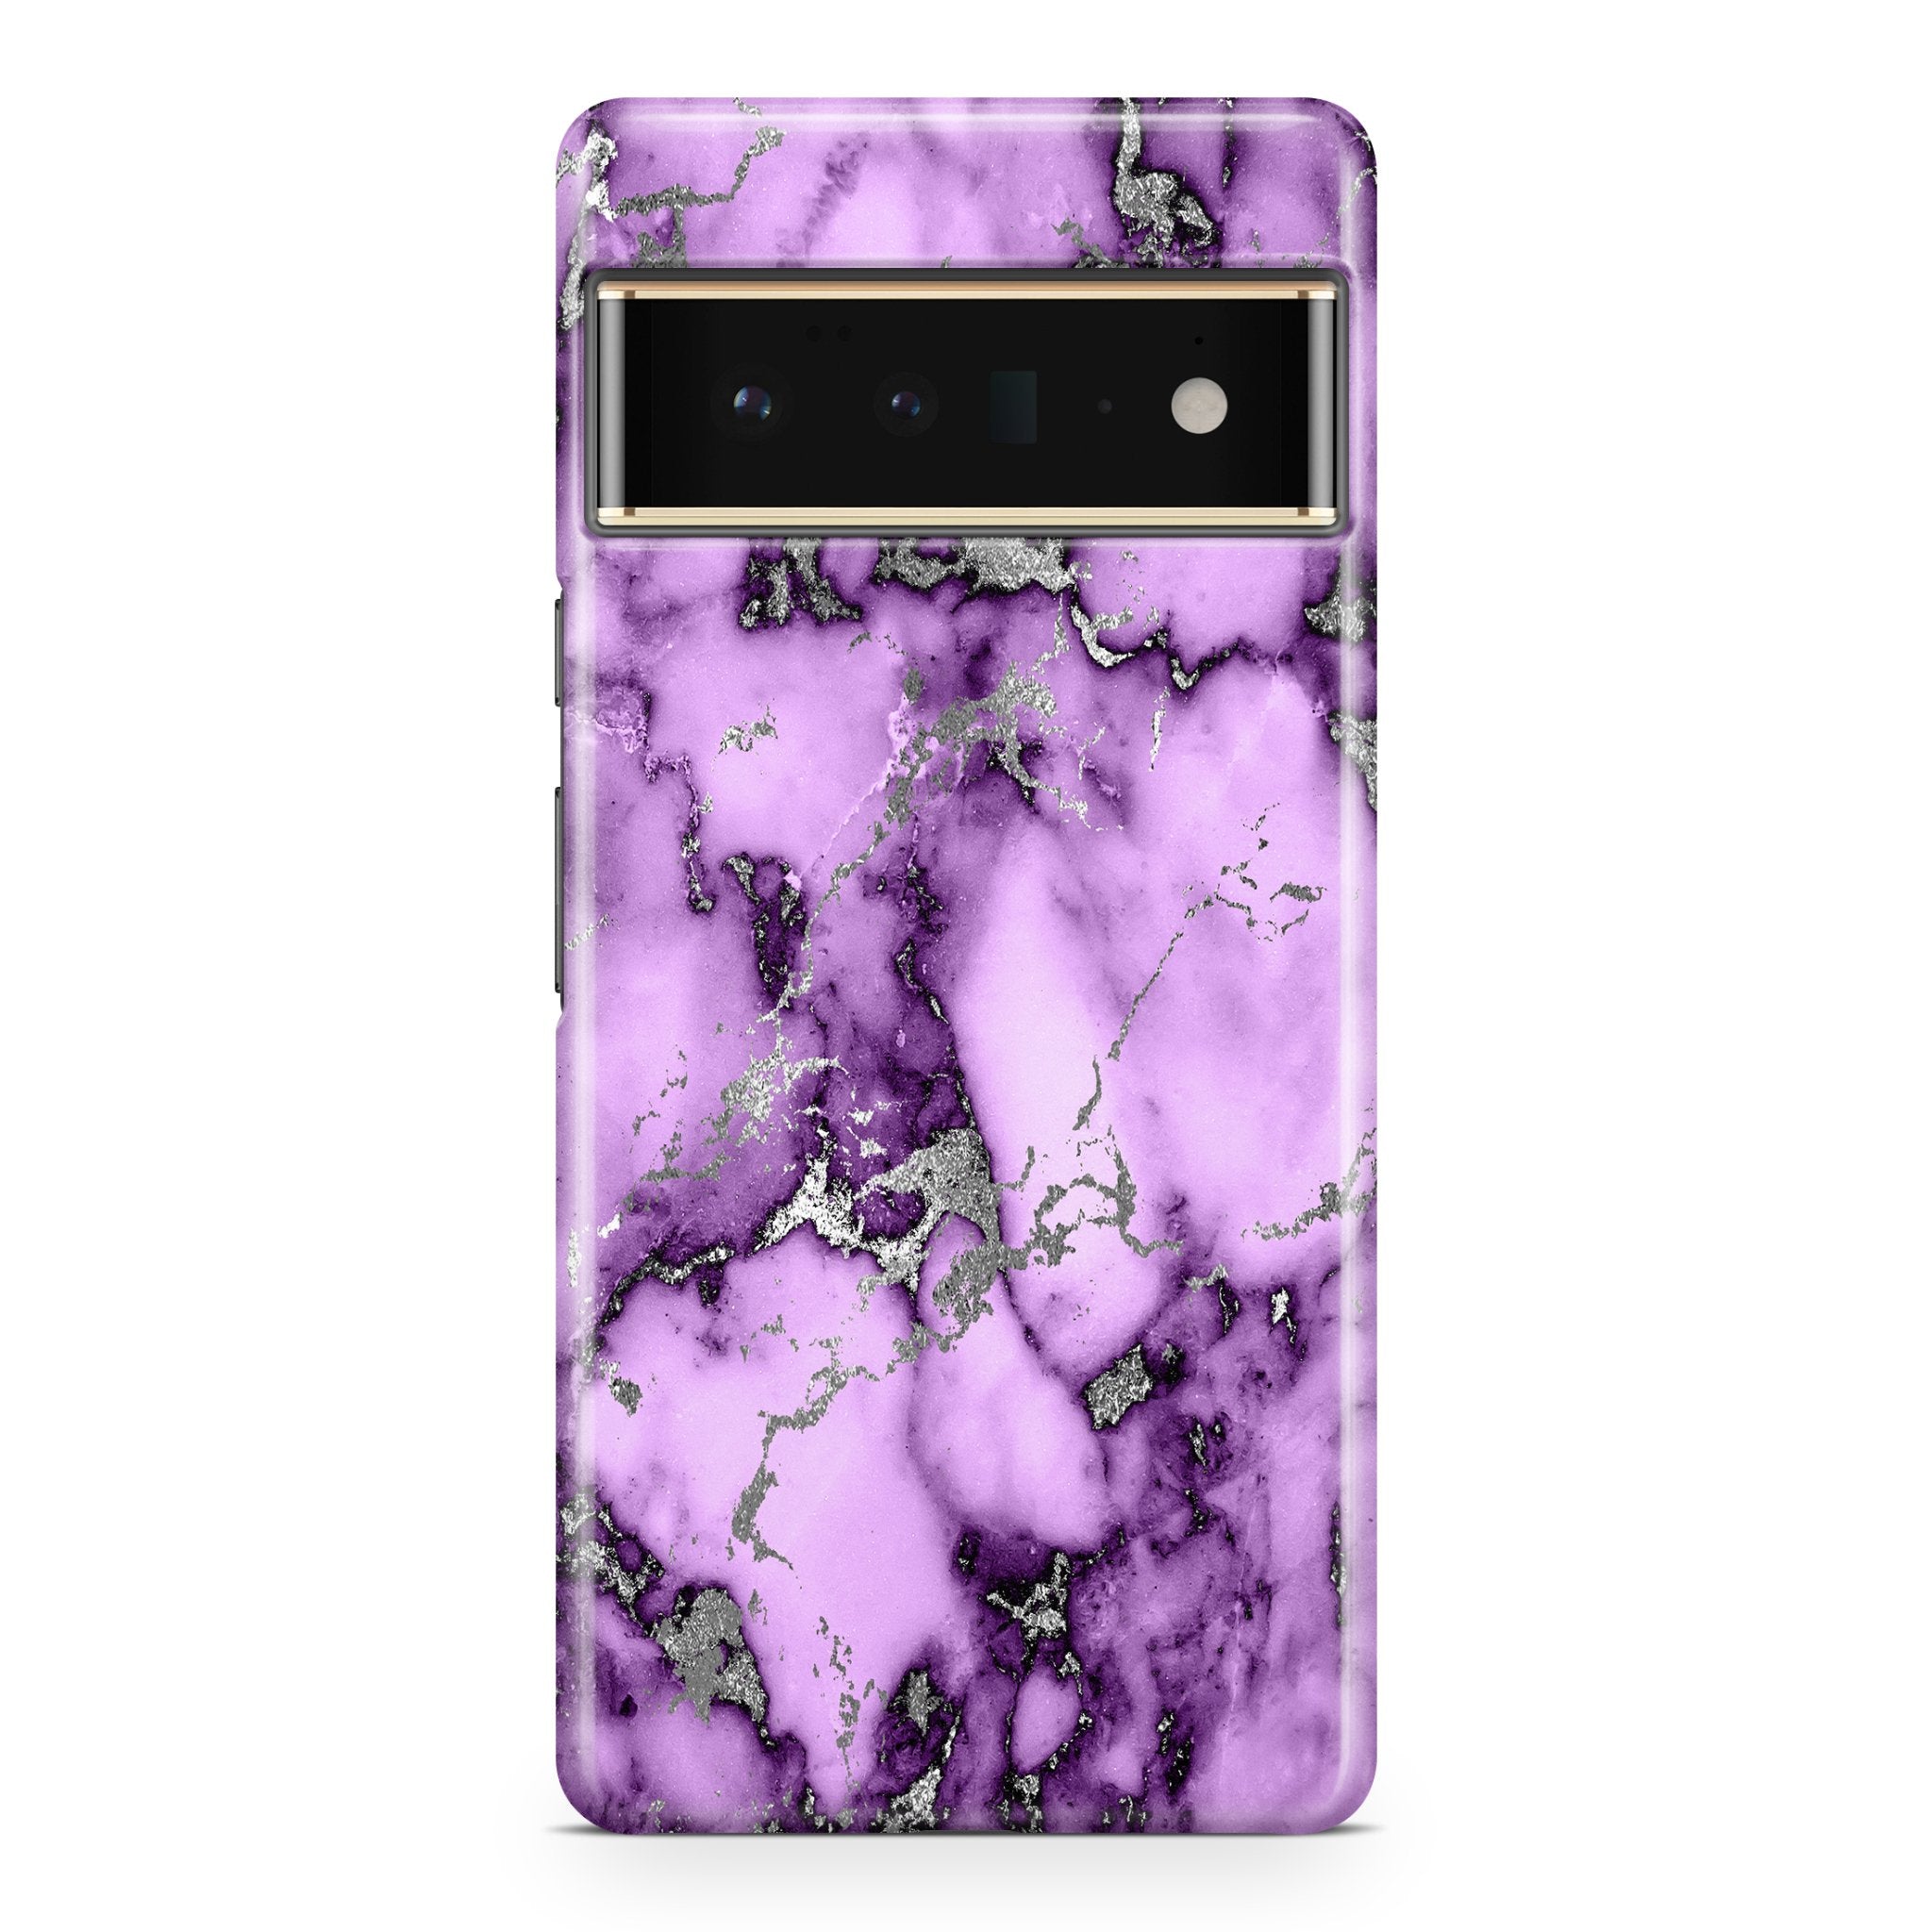 Purple & Silver Marble III - Google phone case designs by CaseSwagger